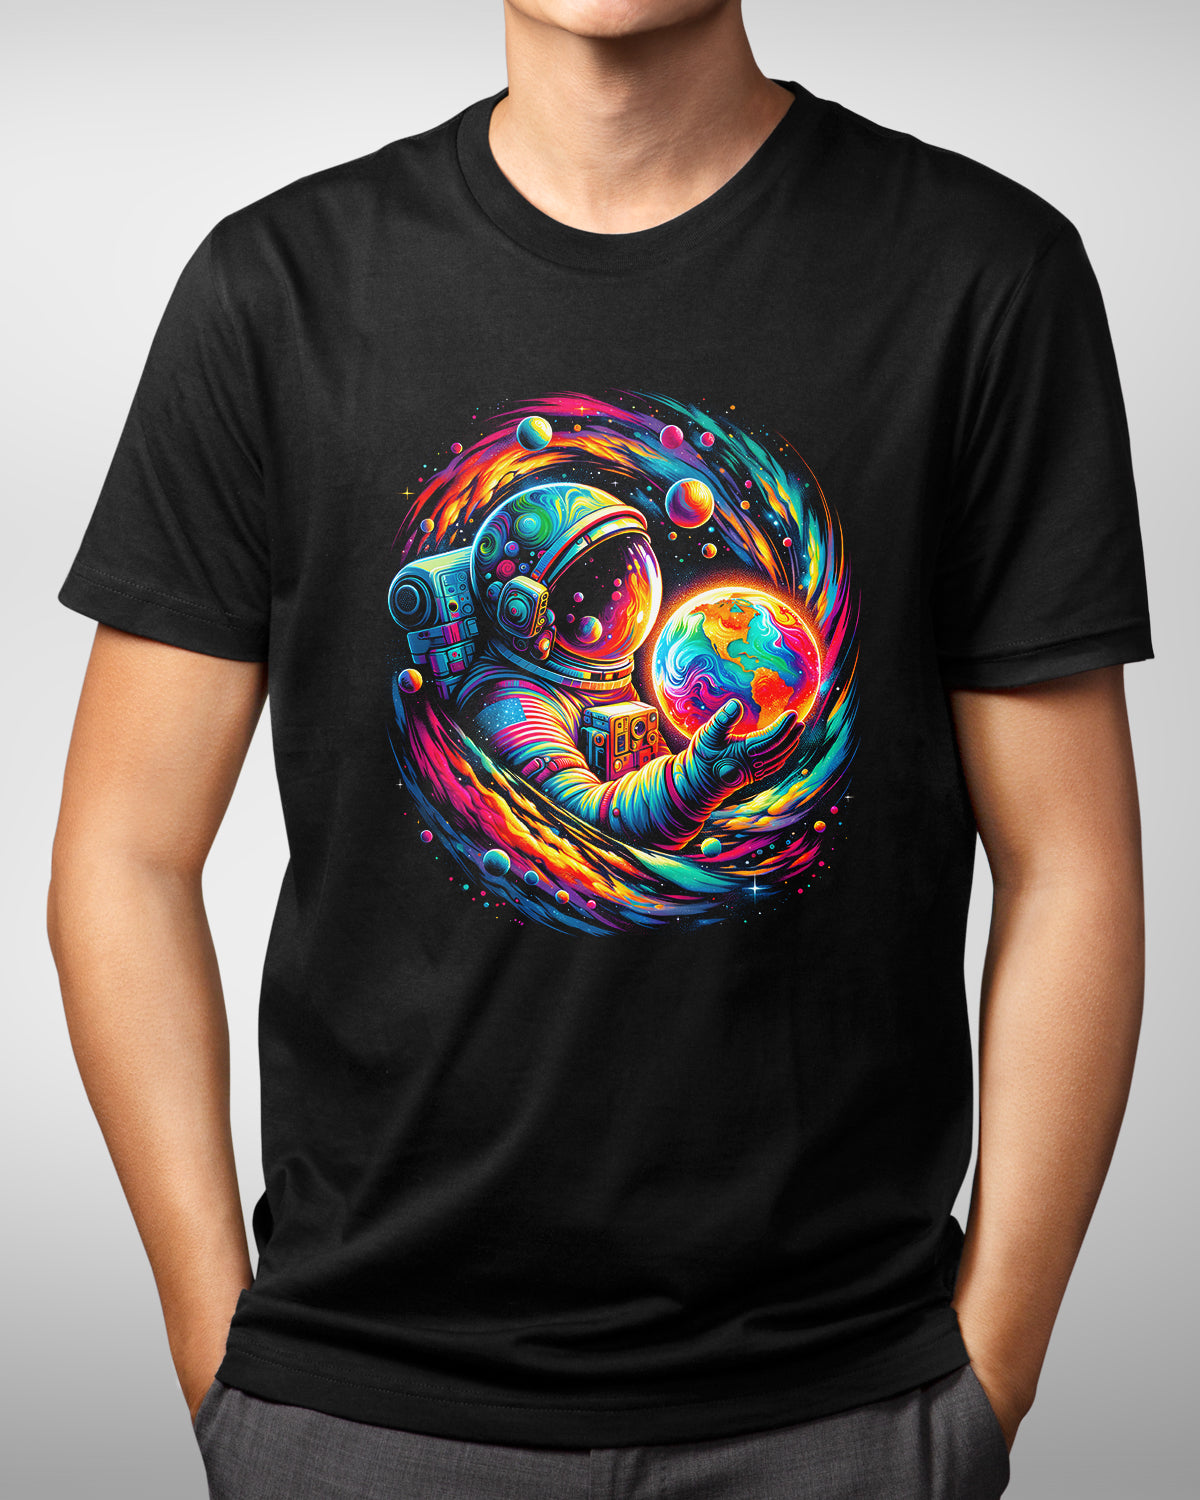 Spaceman Embracing Earth Shirt, Cosmic Explorer Astronaut Tee, Psychedelic Galaxy Design, Outer Space Apparel, Sci-Fi Enthusiast Gift